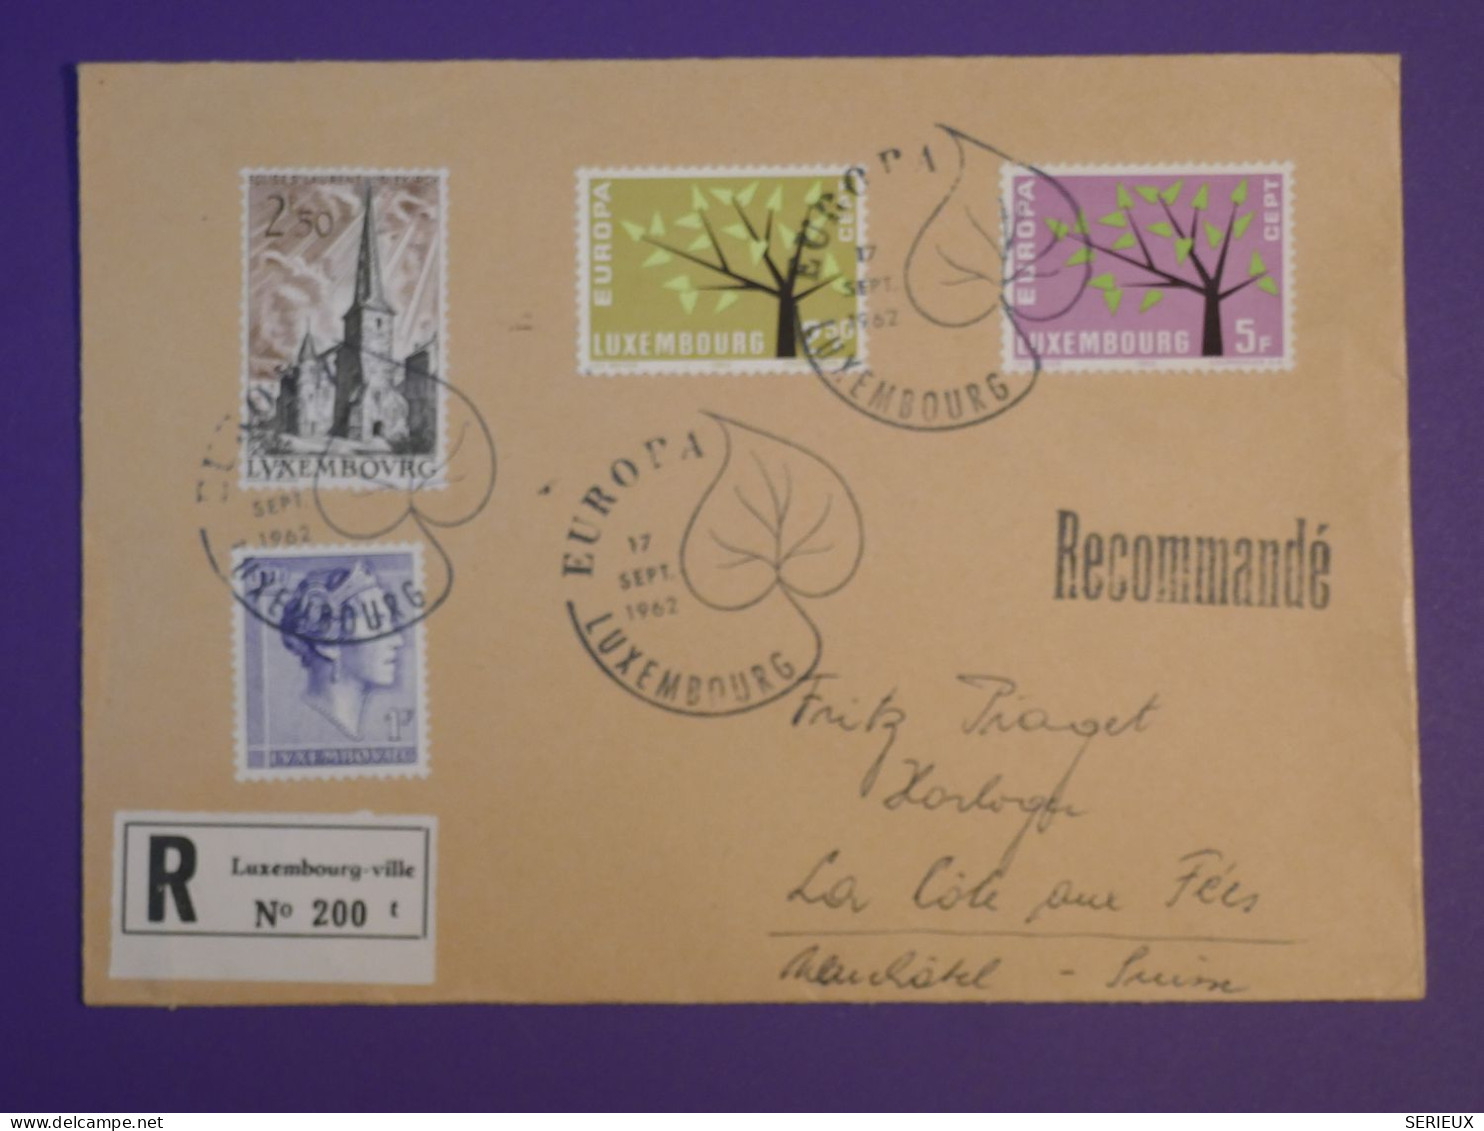 DF21 LUXEMBOURG  BELLE  LETTRE RECOM.   1962   A NEUCHATEL SUISSE +EUROPA + AFF. INTERESSANT++++ - Covers & Documents